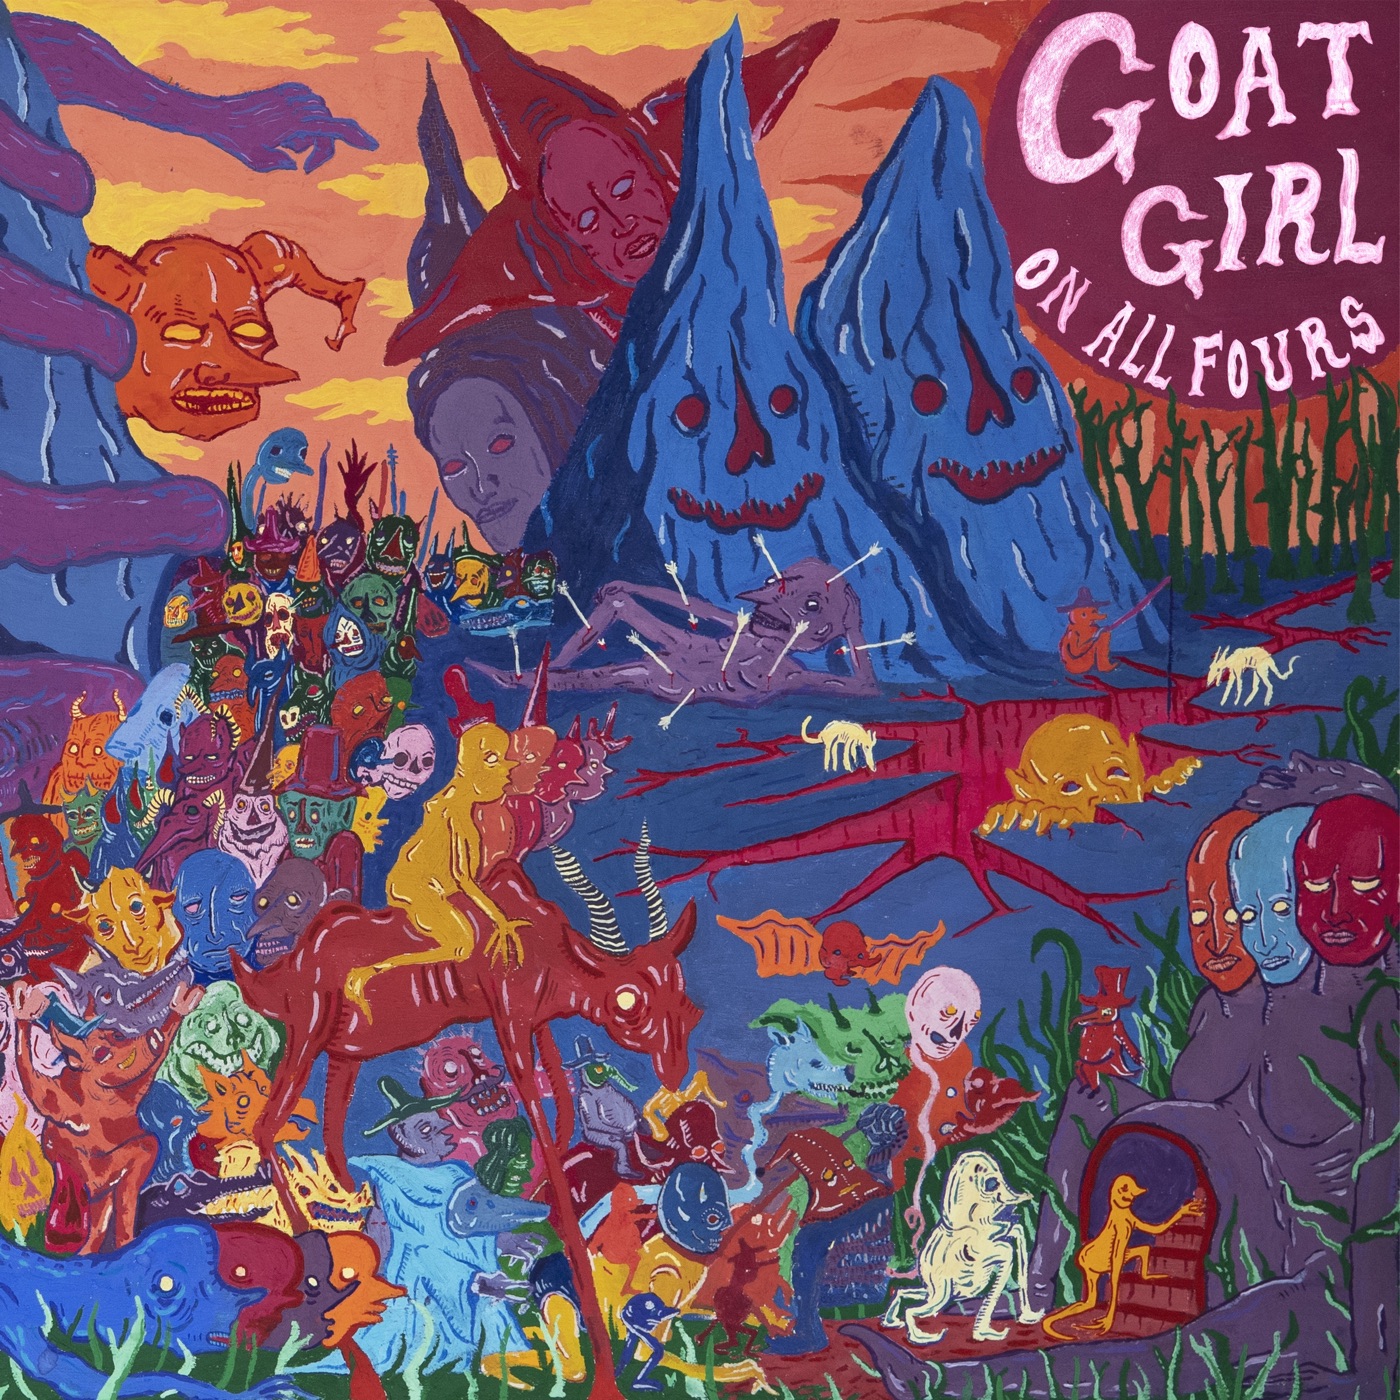 On All Fours by Goat Girl